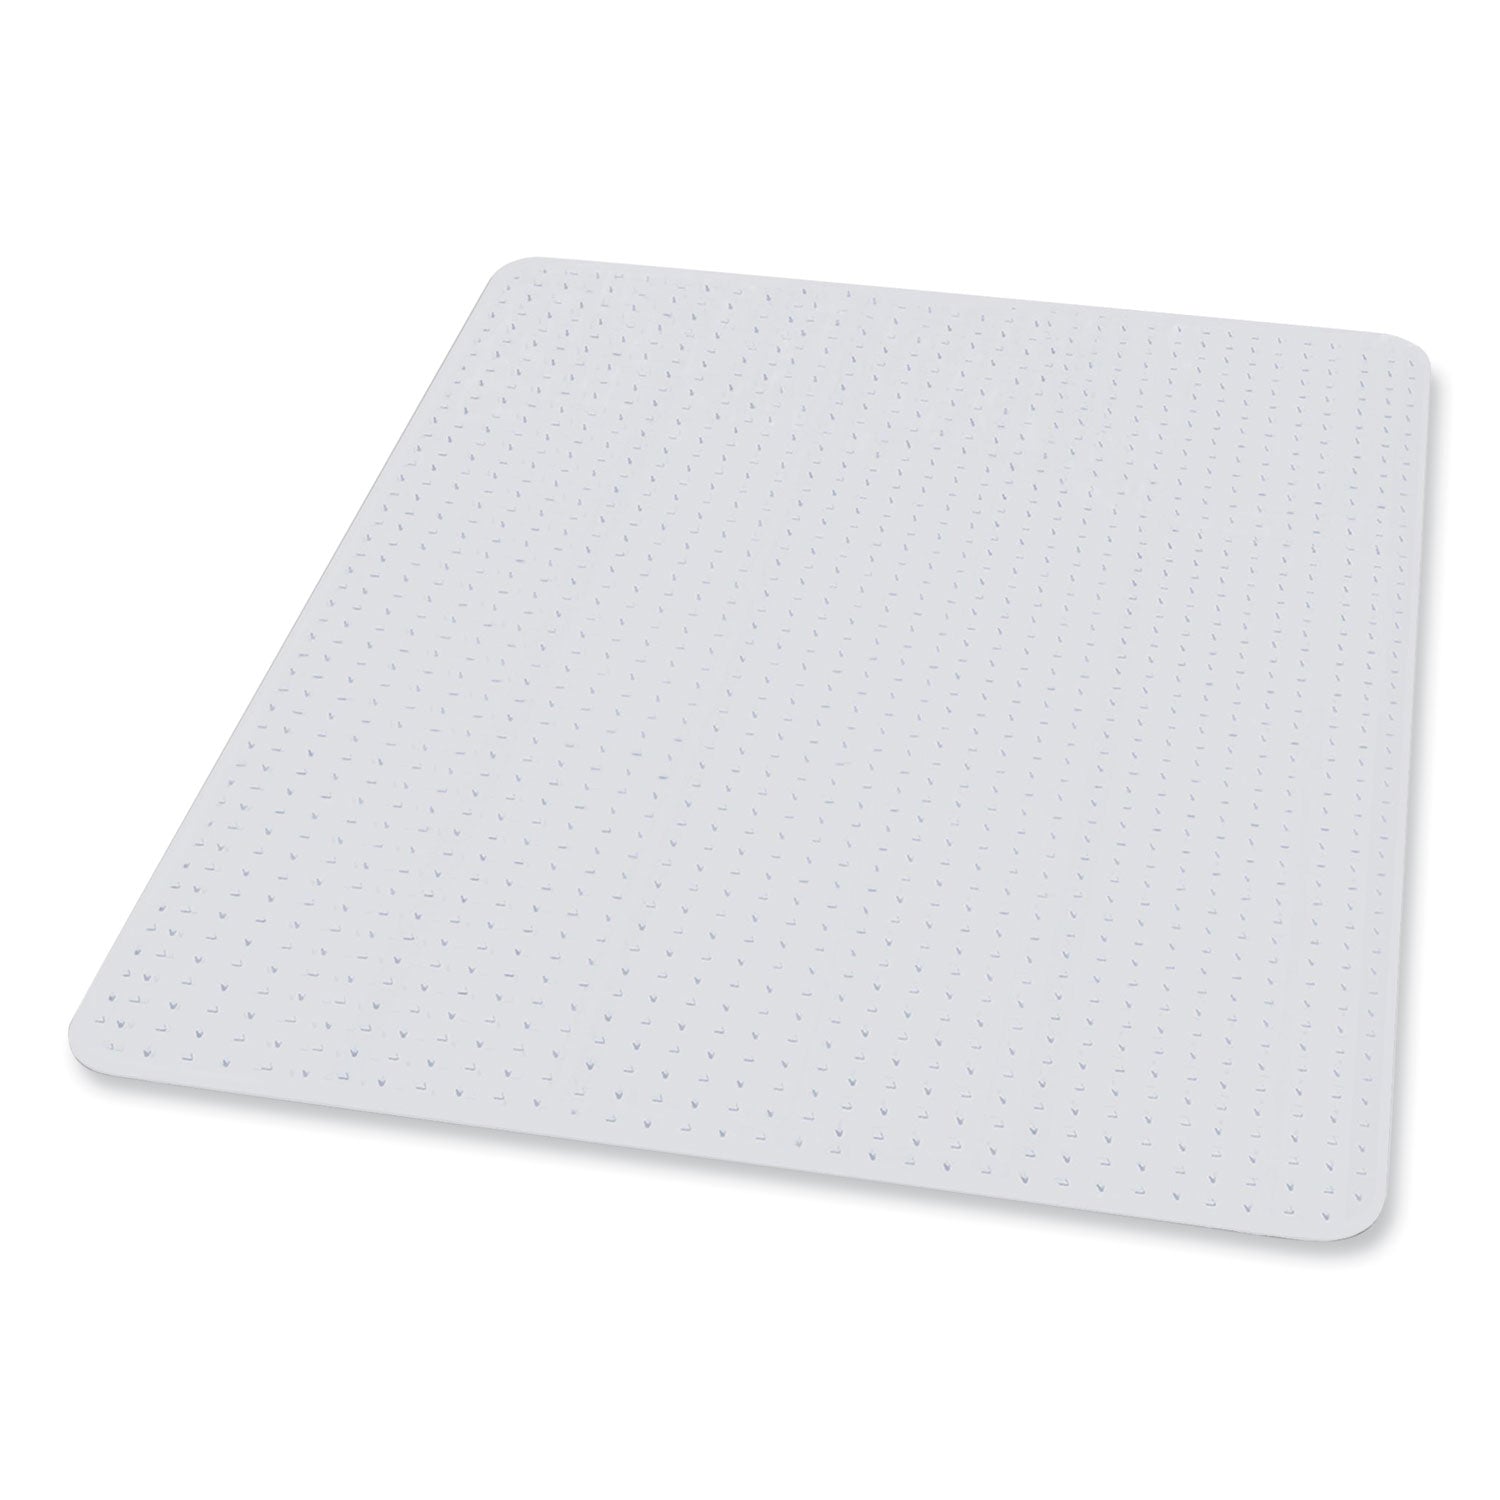 everlife-chair-mat-for-medium-pile-carpet-48-x-72-clear-ships-in-4-6-business-days_esr122486 - 1